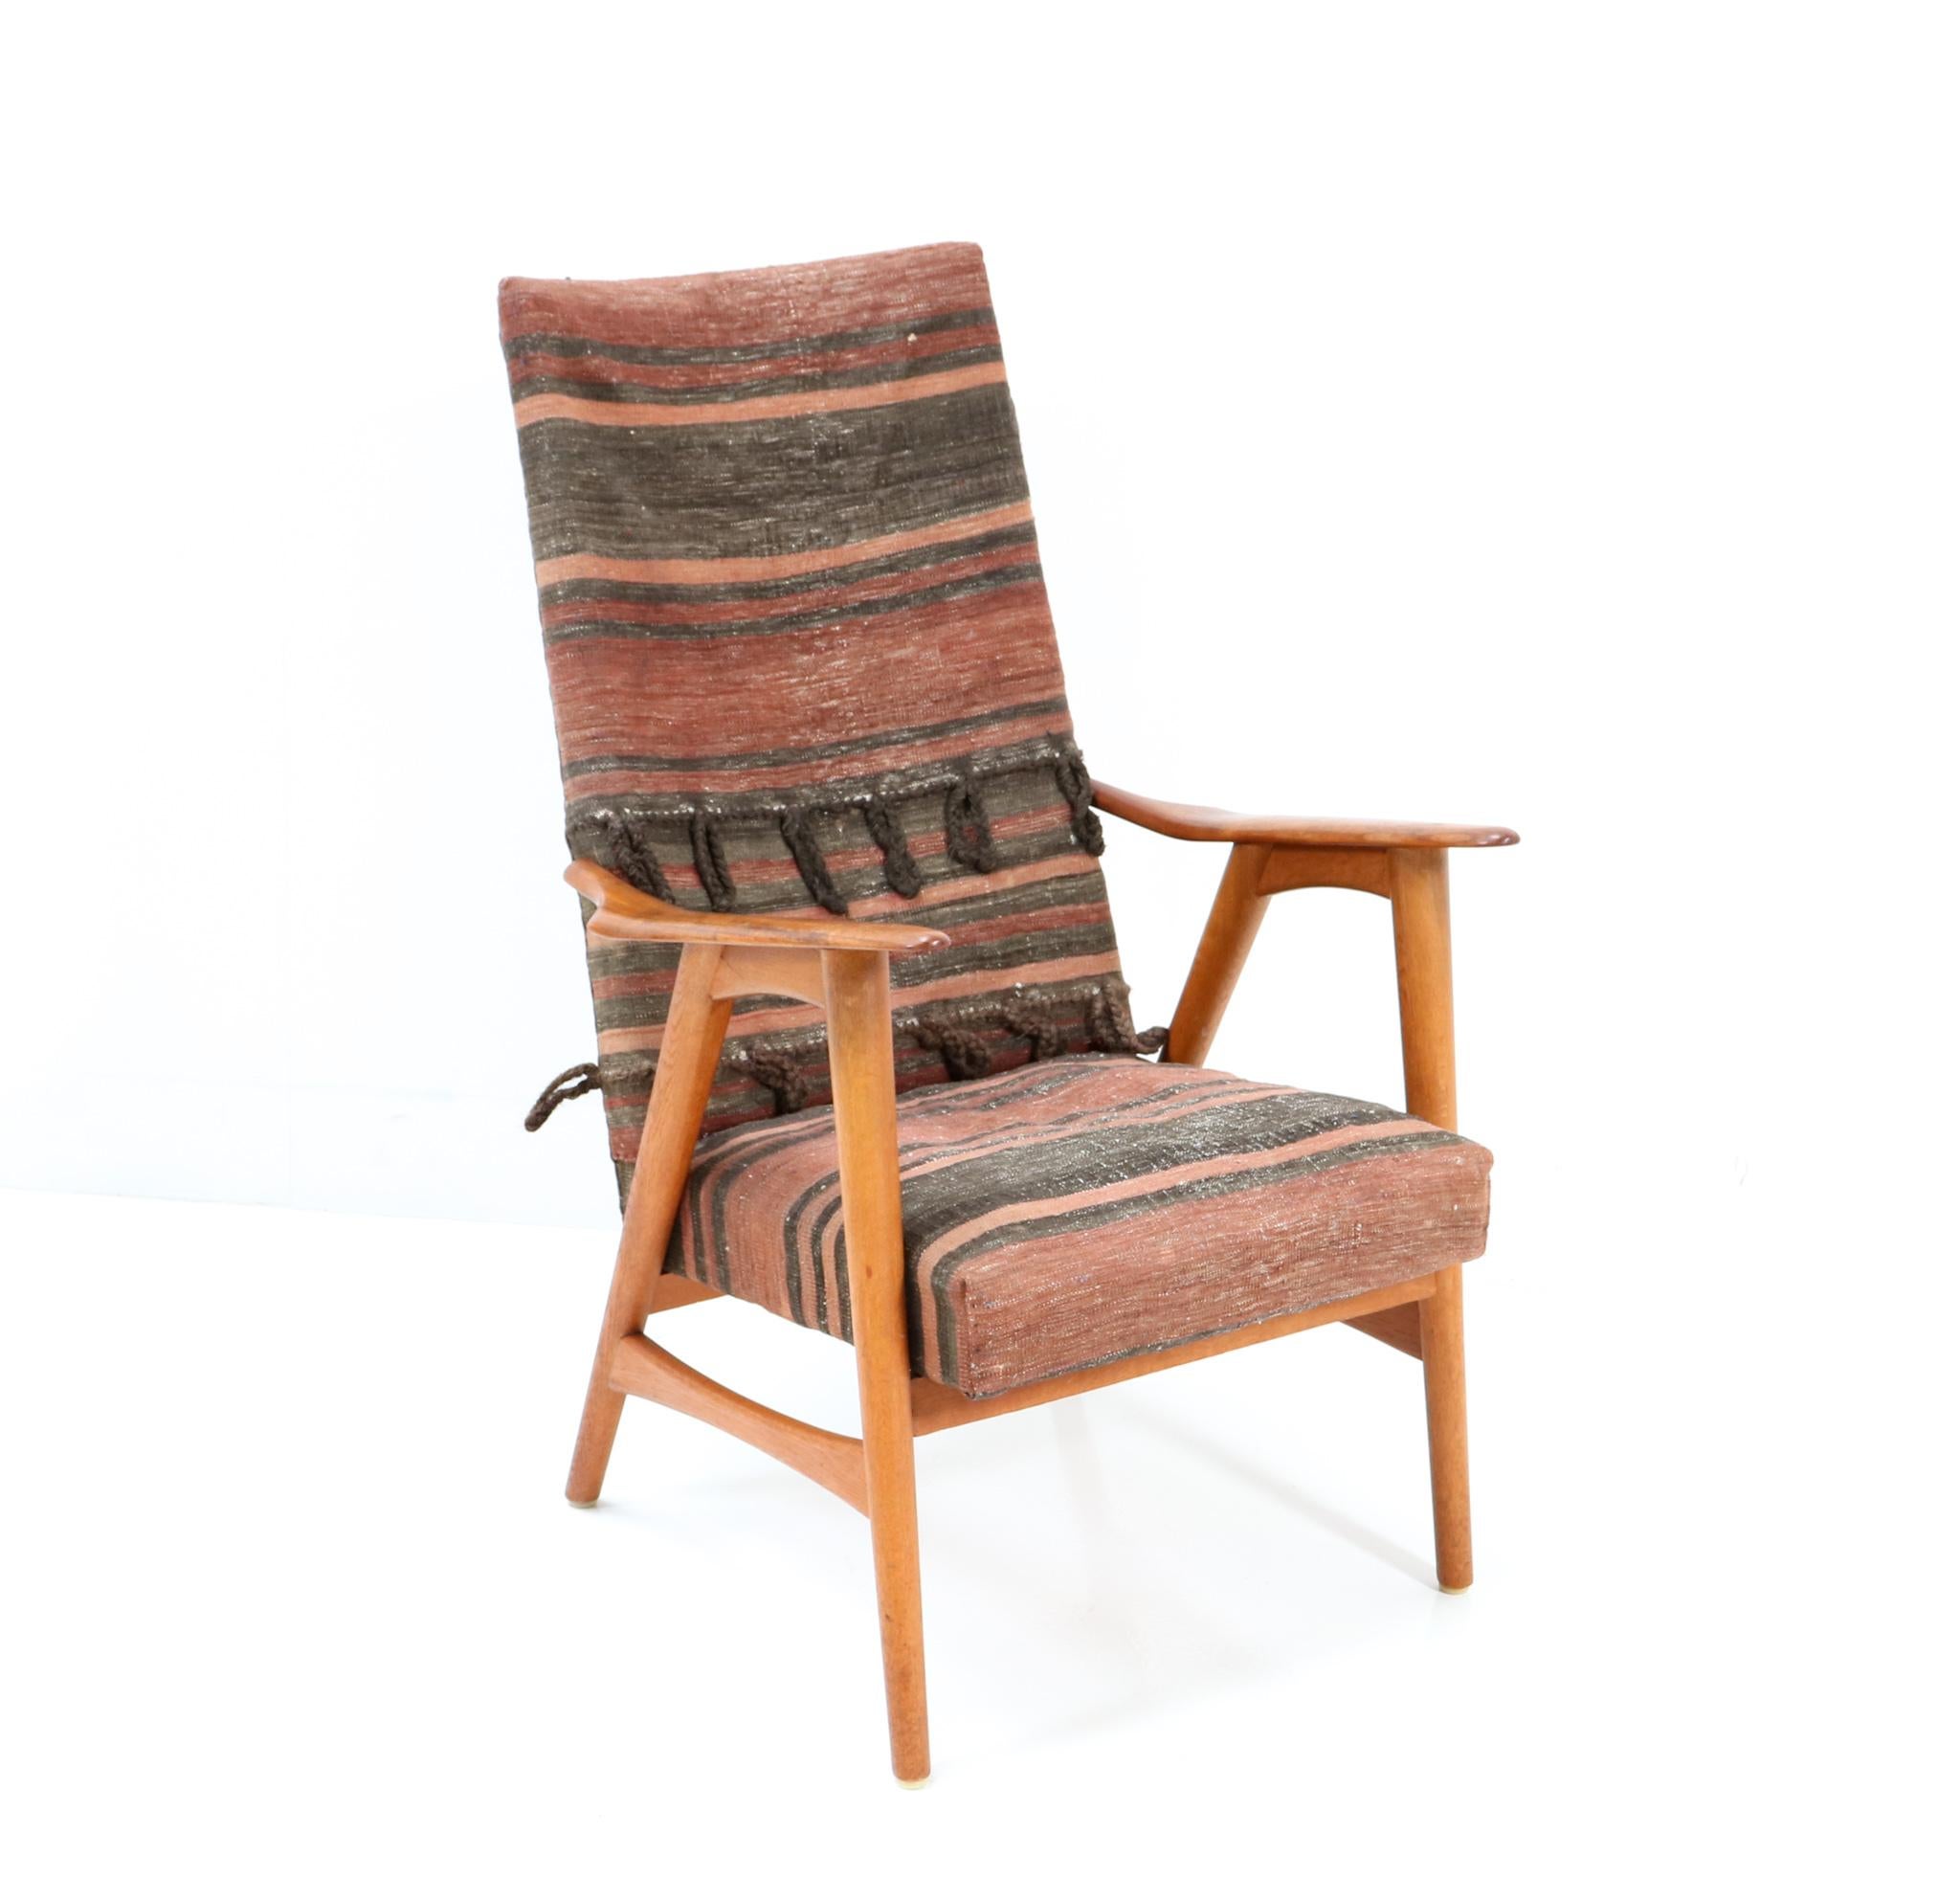 Teak Mid-Century Modern Lounge Chair with Kilim Upholstery, 1960s In Good Condition For Sale In Amsterdam, NL